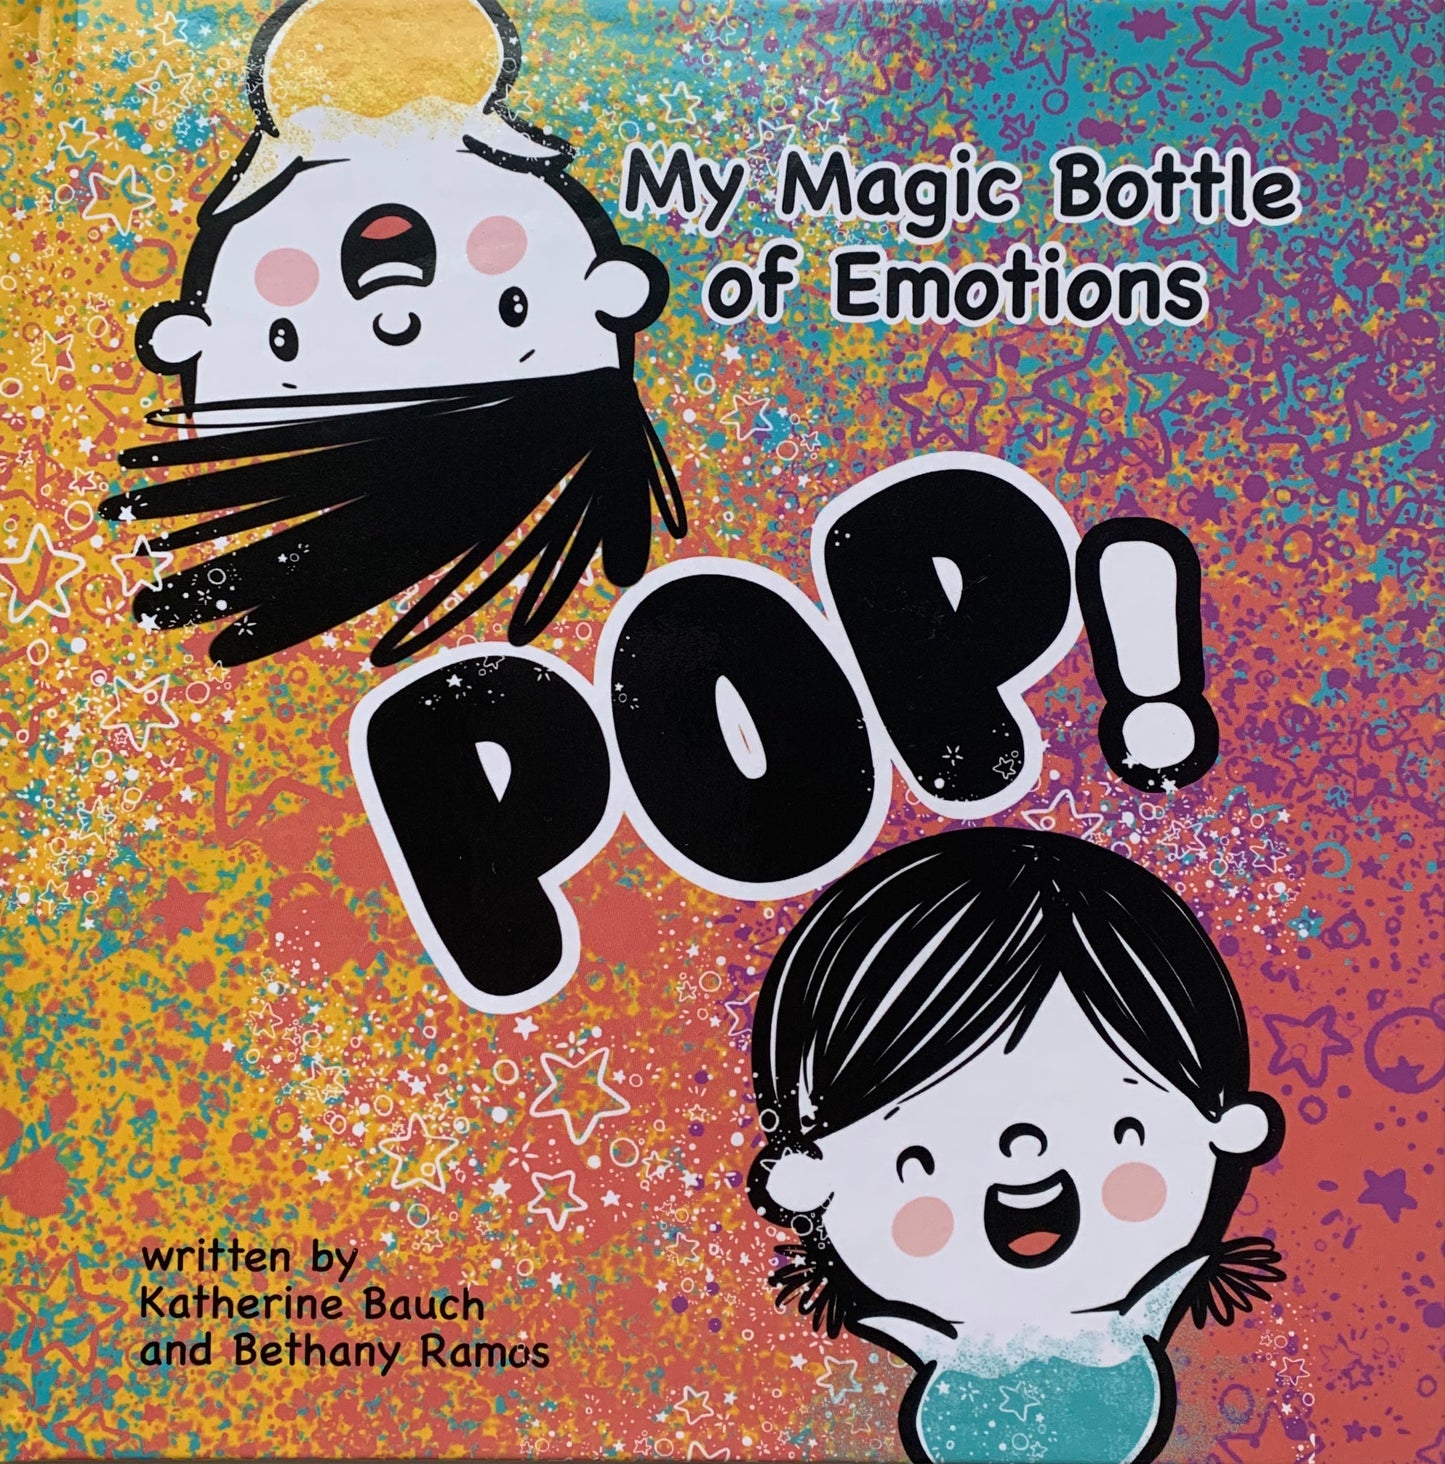 My Magic Bottle of Emotions — Autographed Hardcover Book